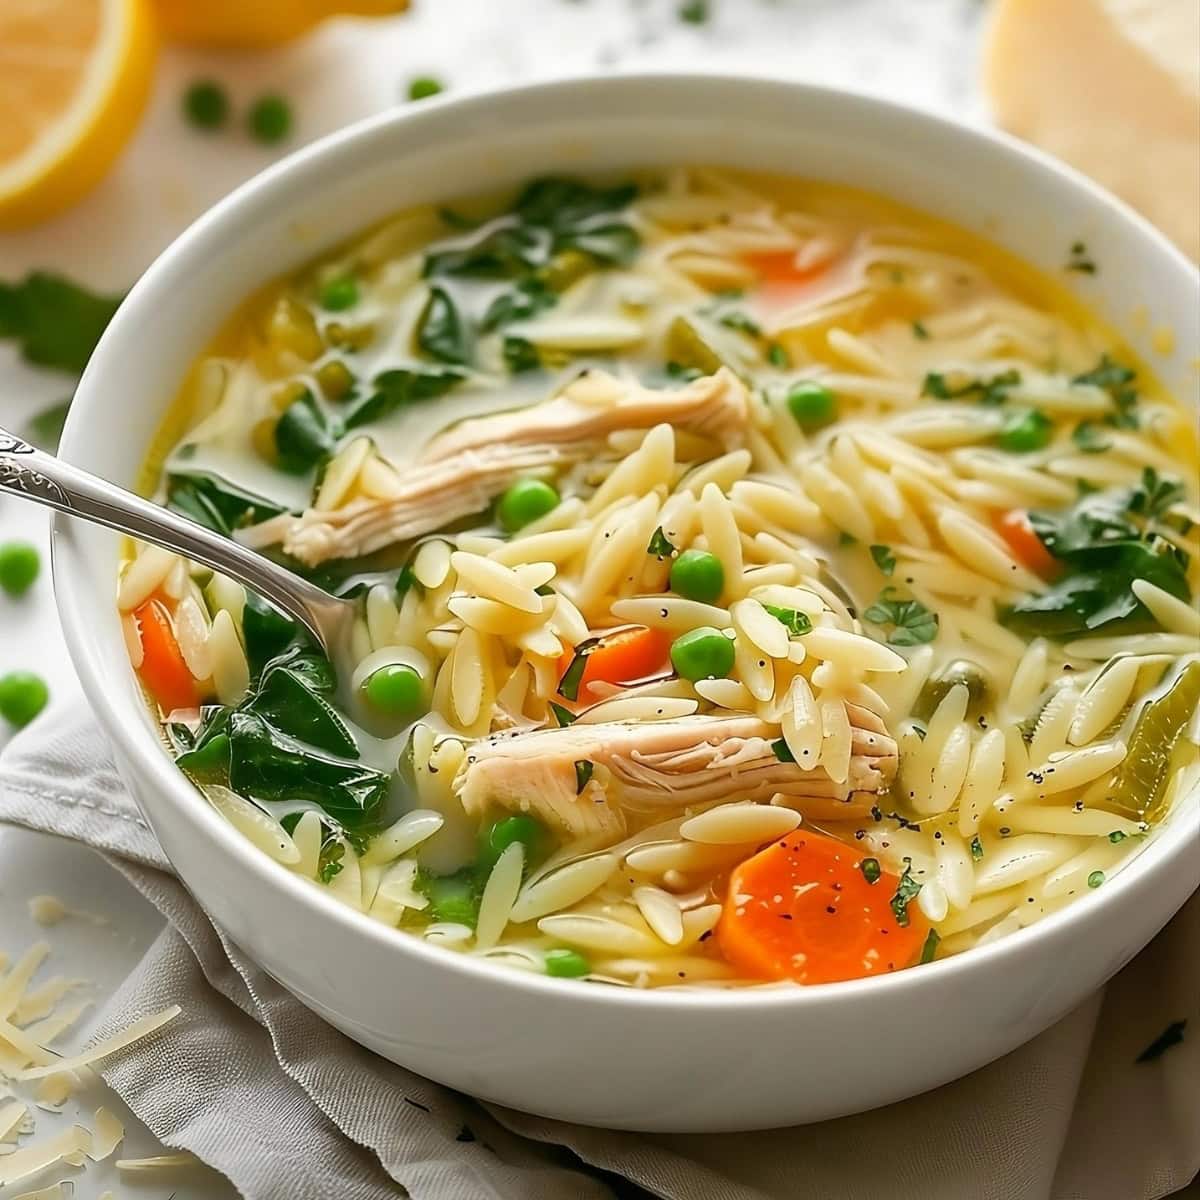 Bowl with lemon chicken orzo soup with green peas, shredded chicken, carrots and spinach.